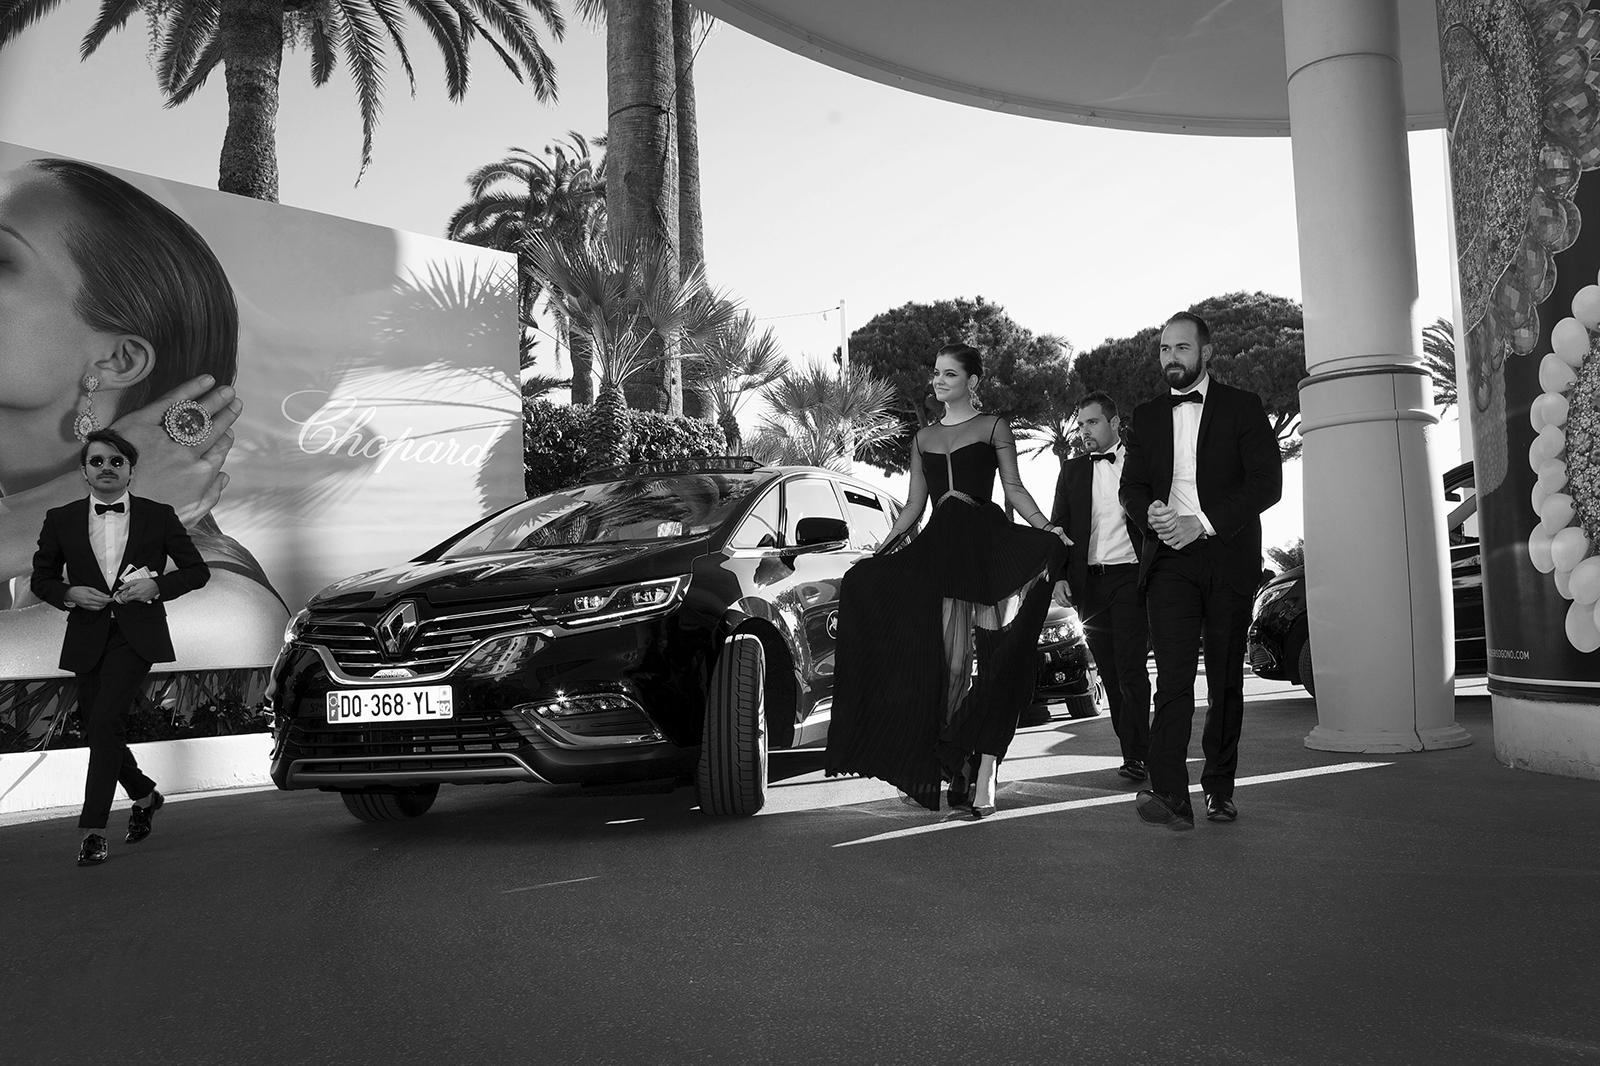 Laurent Campus Figurative Photograph - The Bodyguards - Cannes Festival, Signed limited edition contemporary art print